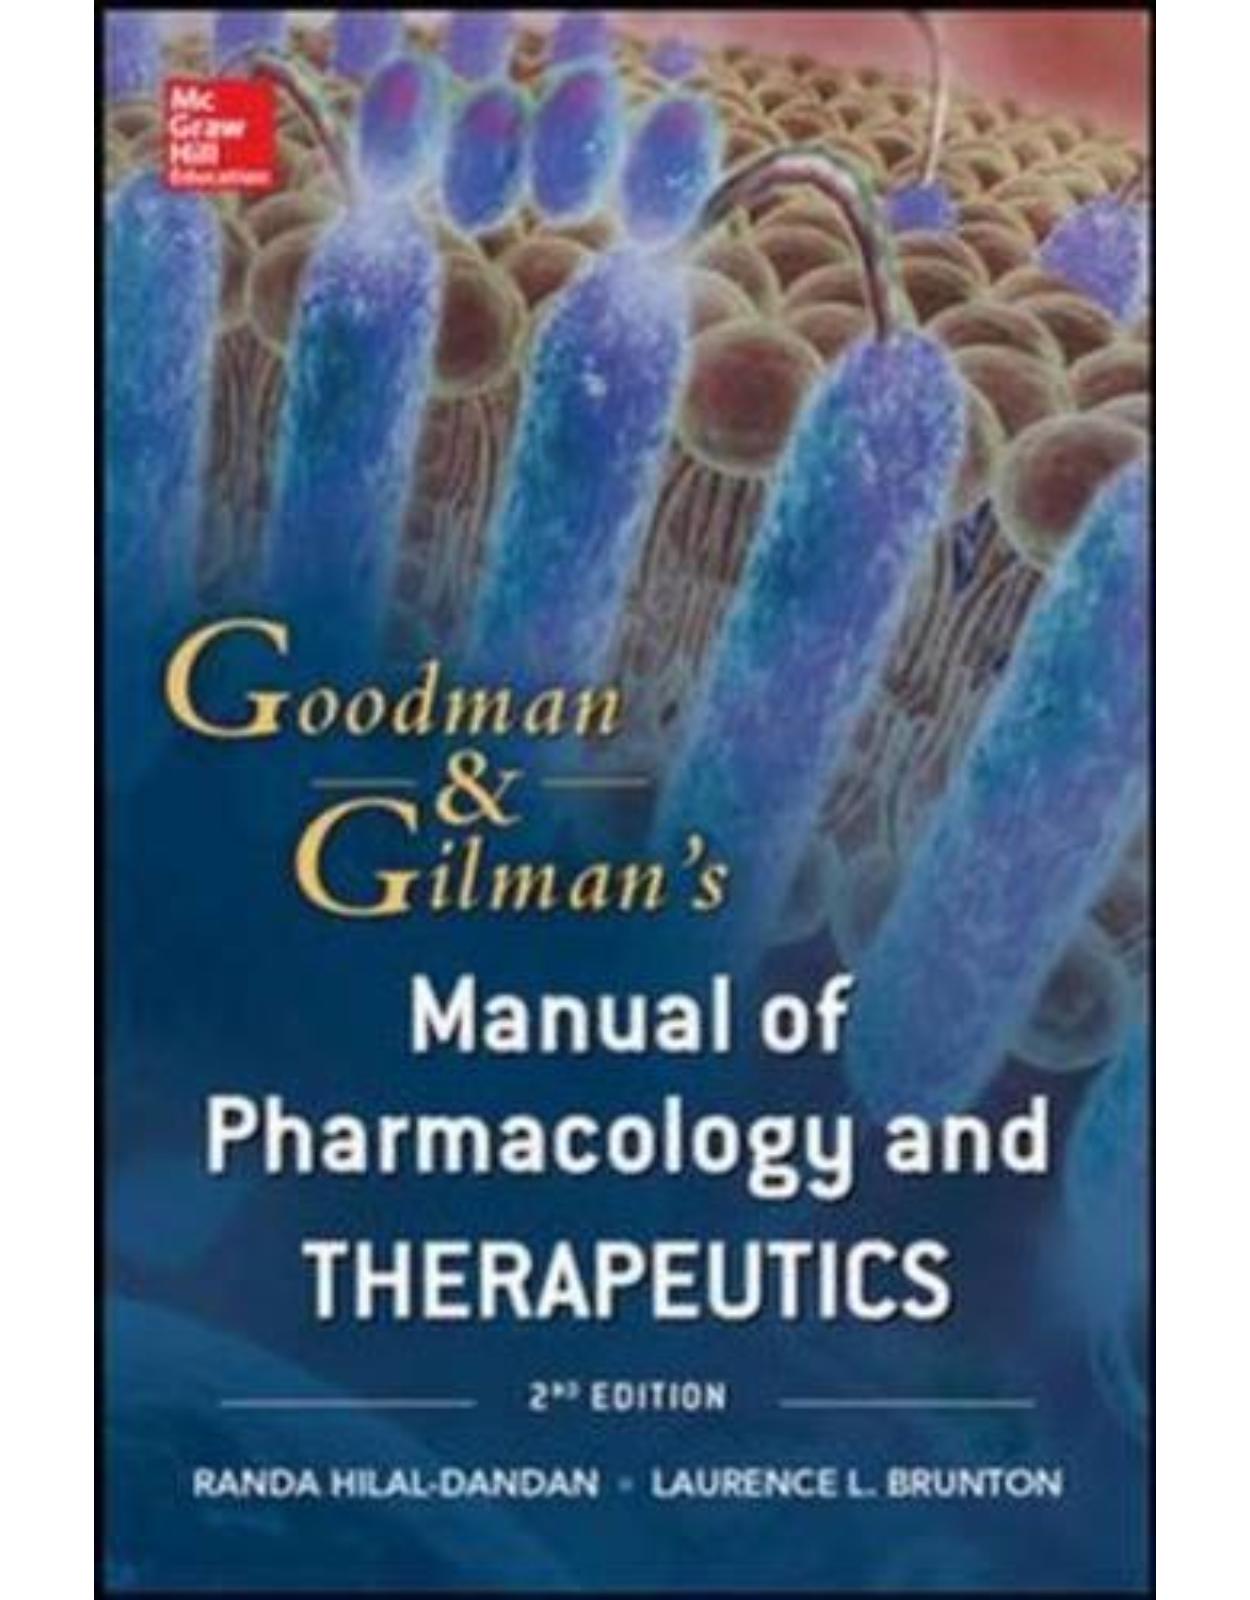 Goodman and Gilman Manual of Pharmacology and Therapeutics